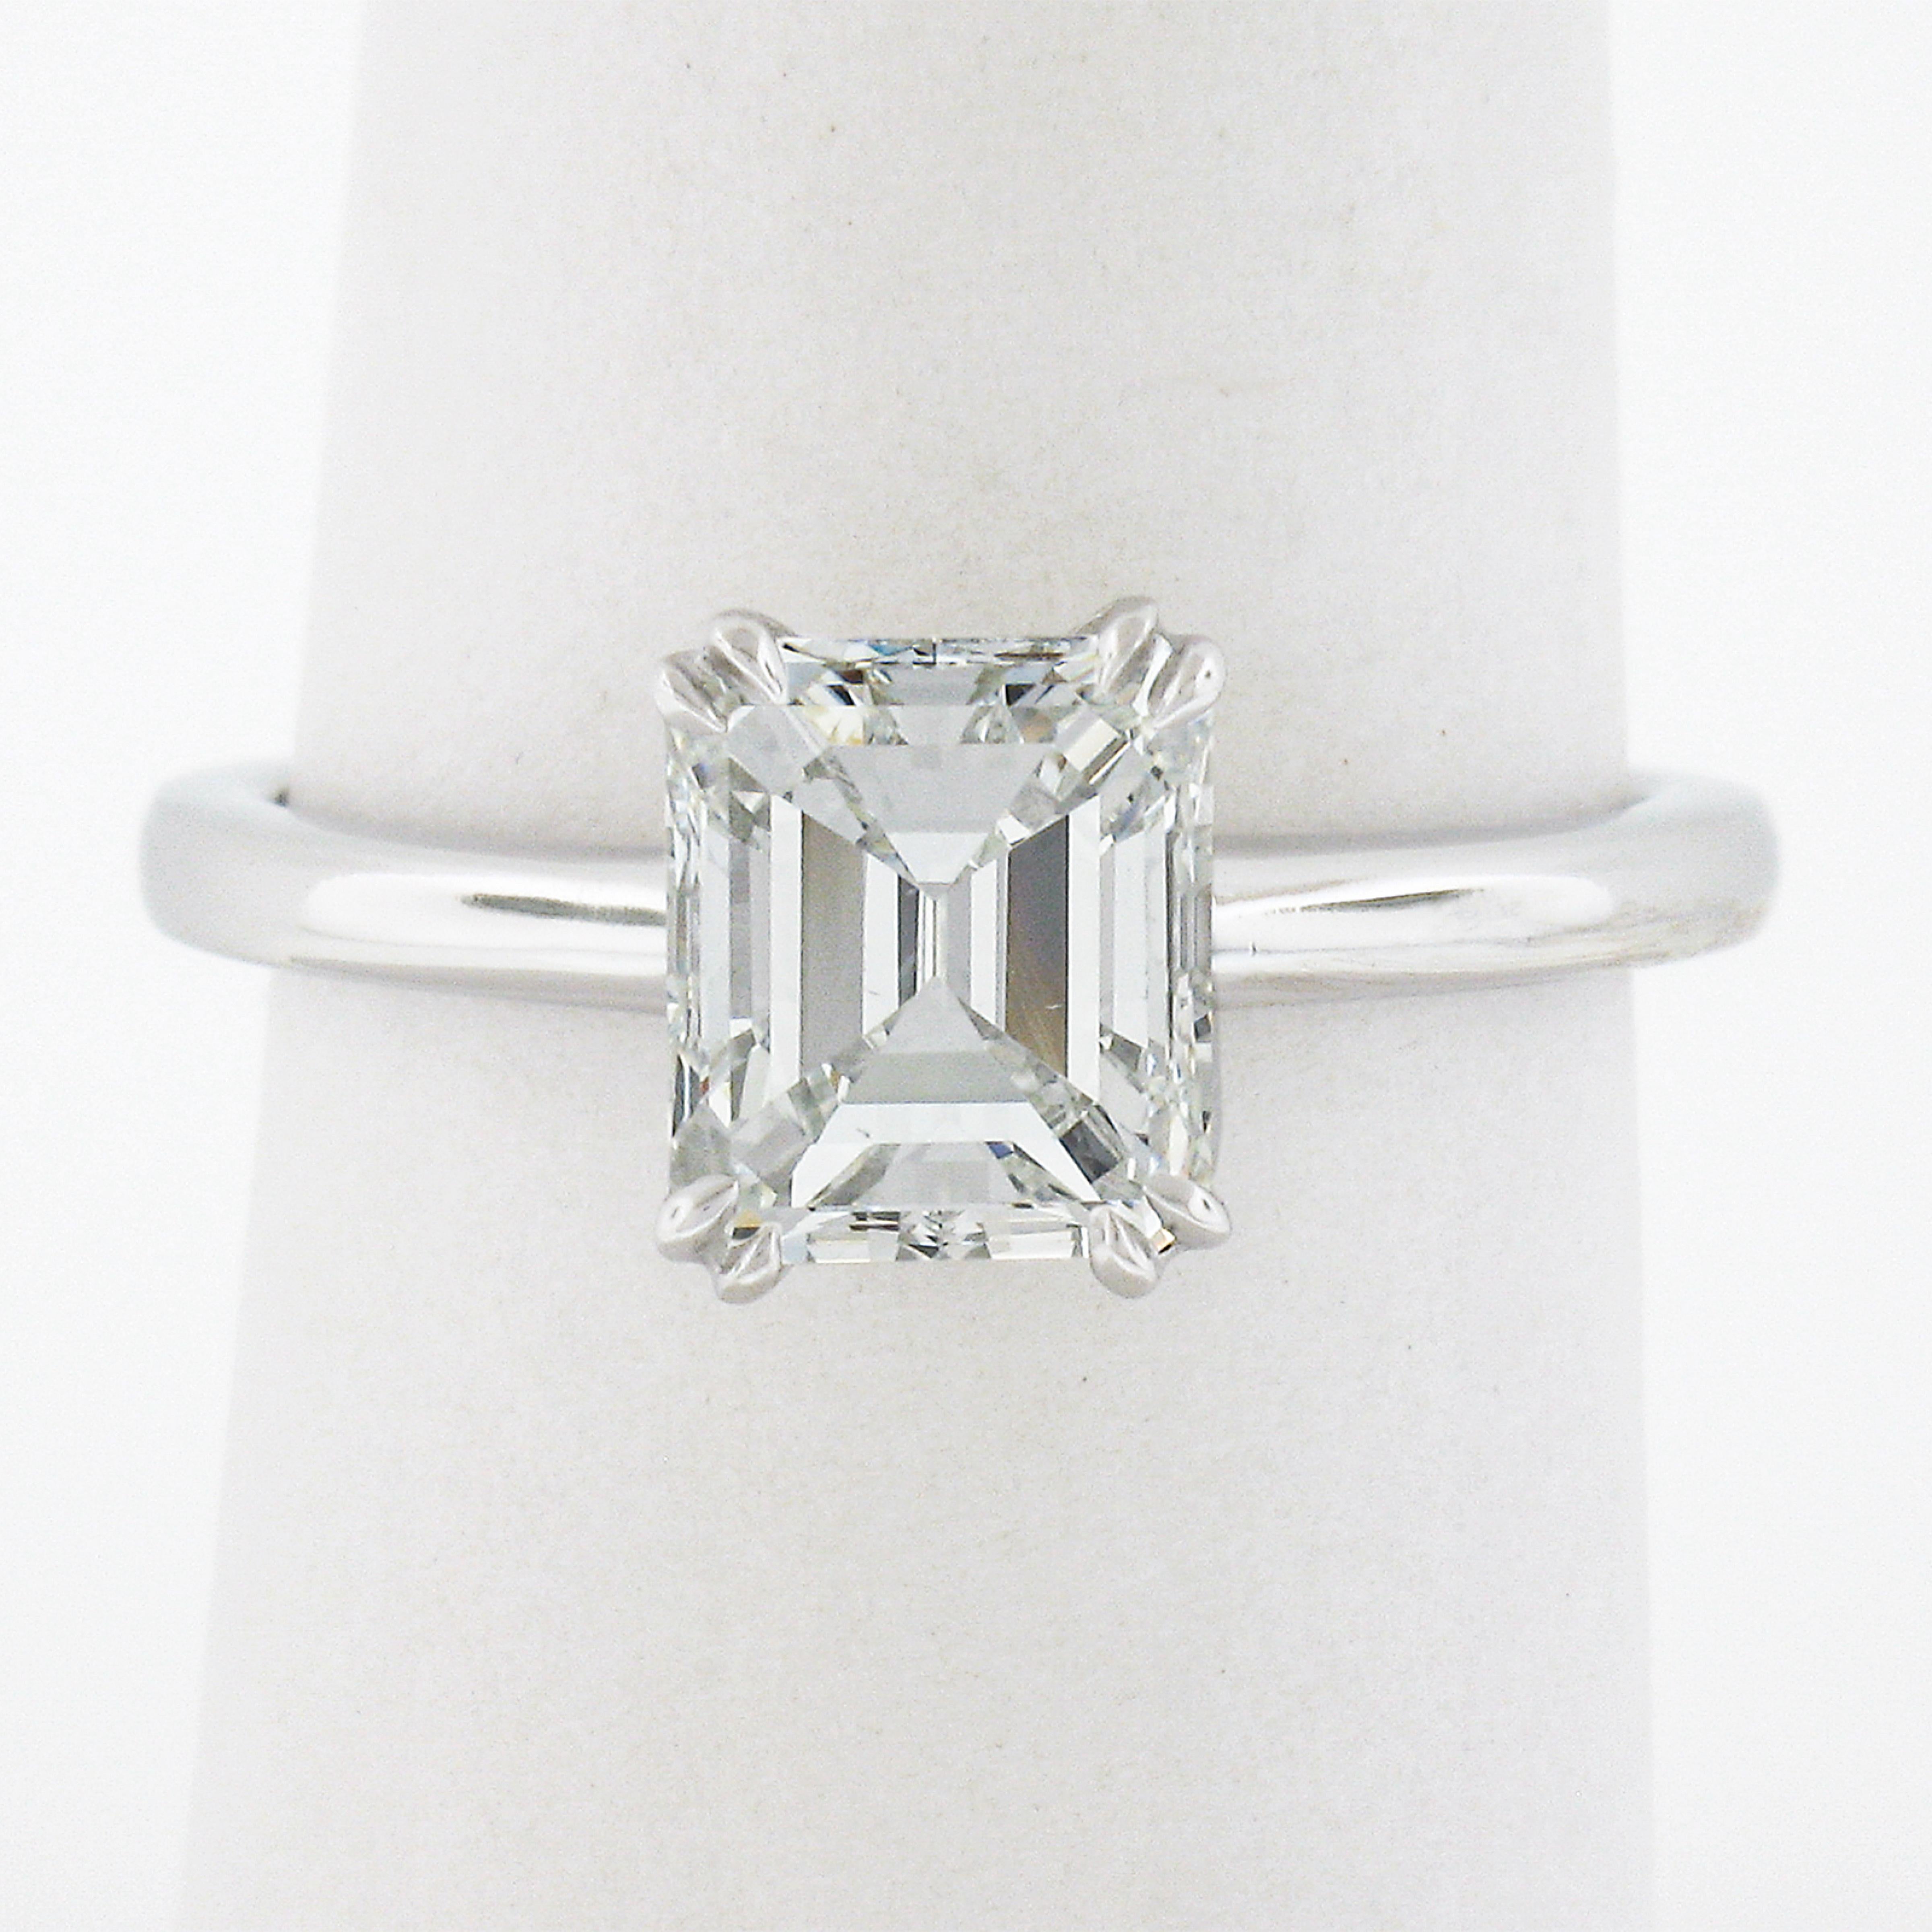 This classic and simply gorgeous solitaire engagement ring is newly crafted in solid platinum and features a very fine quality old emerald cut diamond neatly set at its center. This stunning, GIA certified, solitaire weighs exactly 1.88 carats and